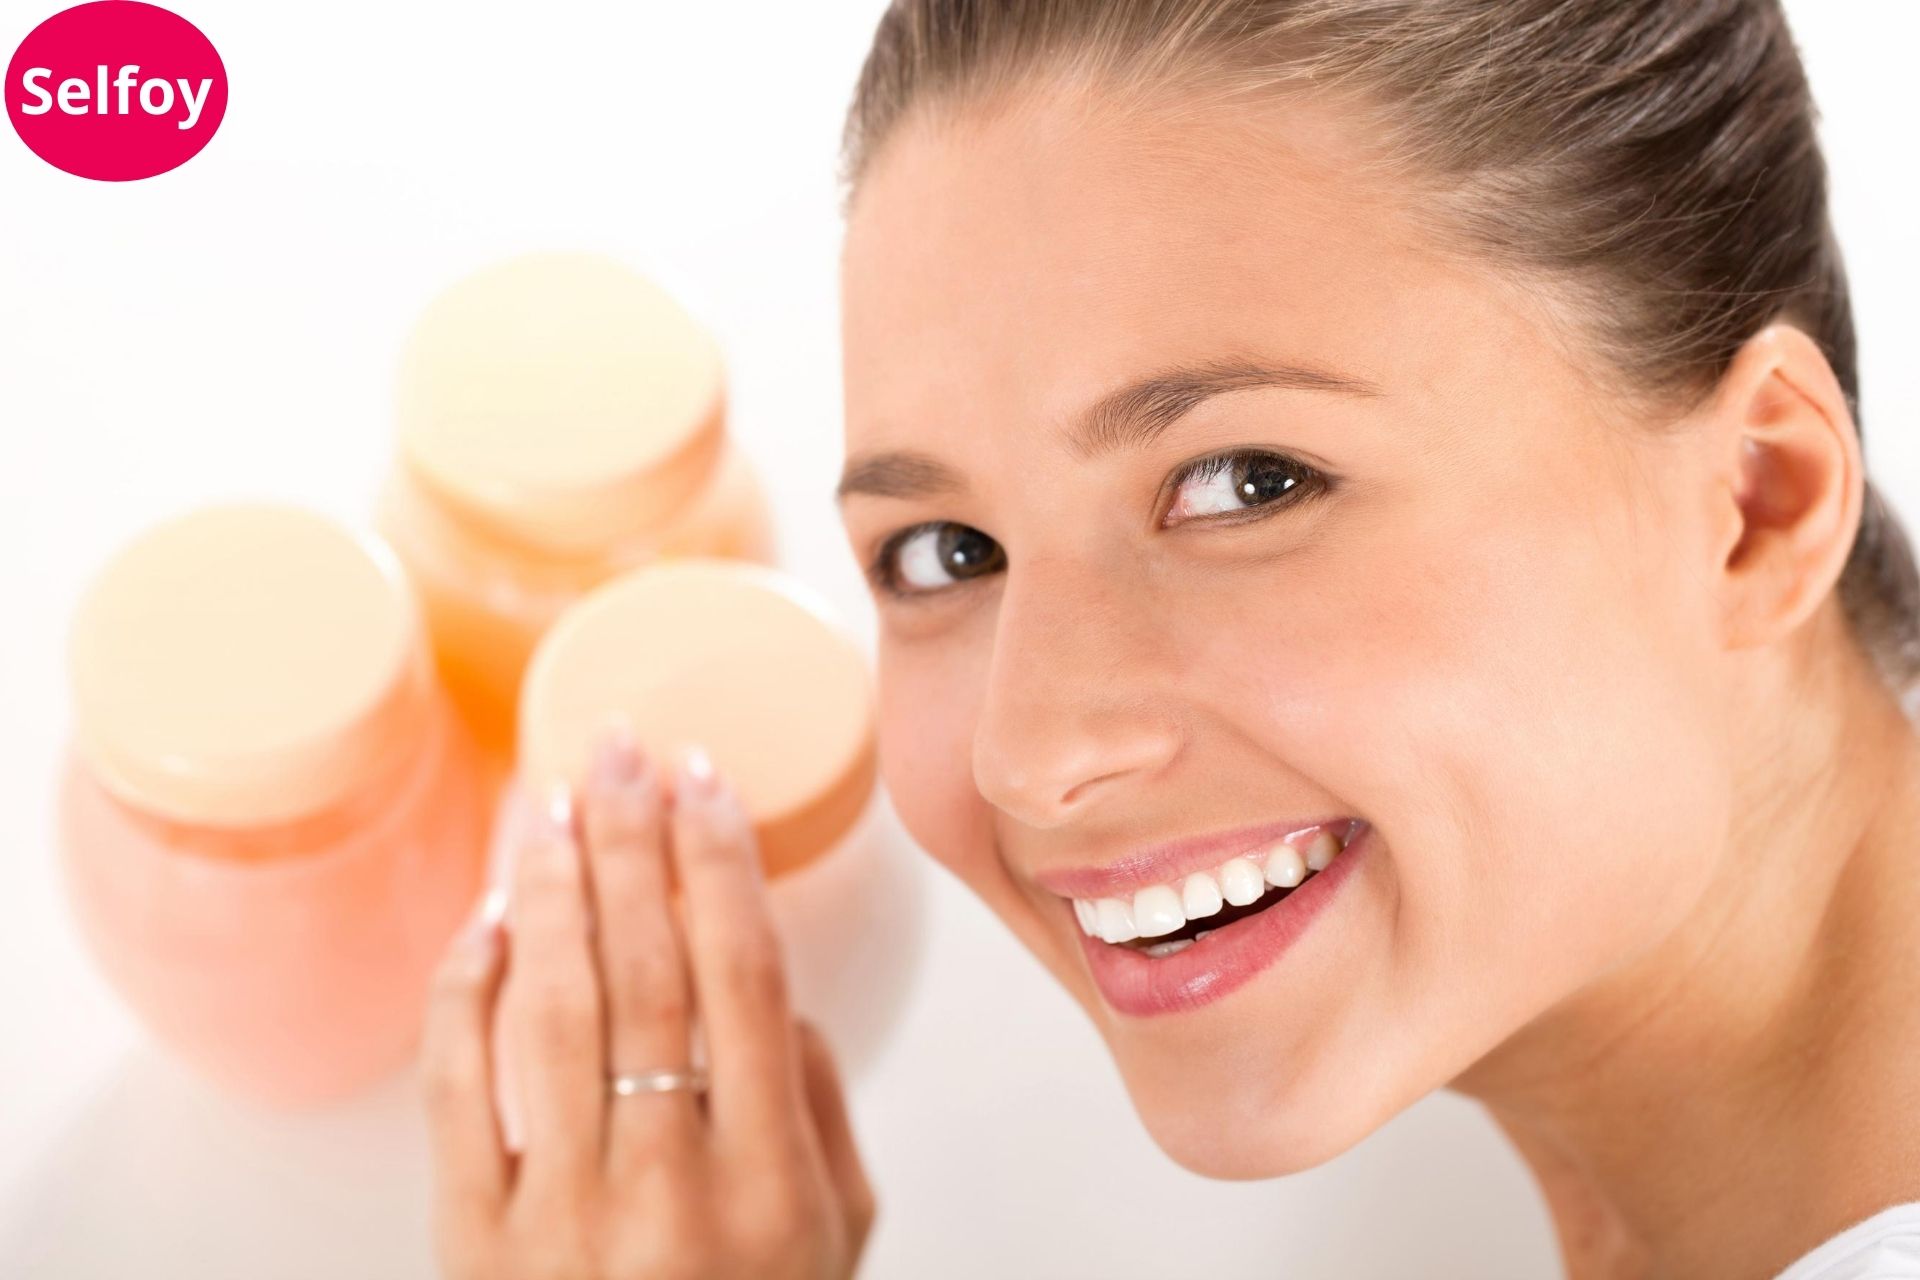 Woman is smiling and showing Good Personal Hygiene Helps to Develop Positive Self Esteem